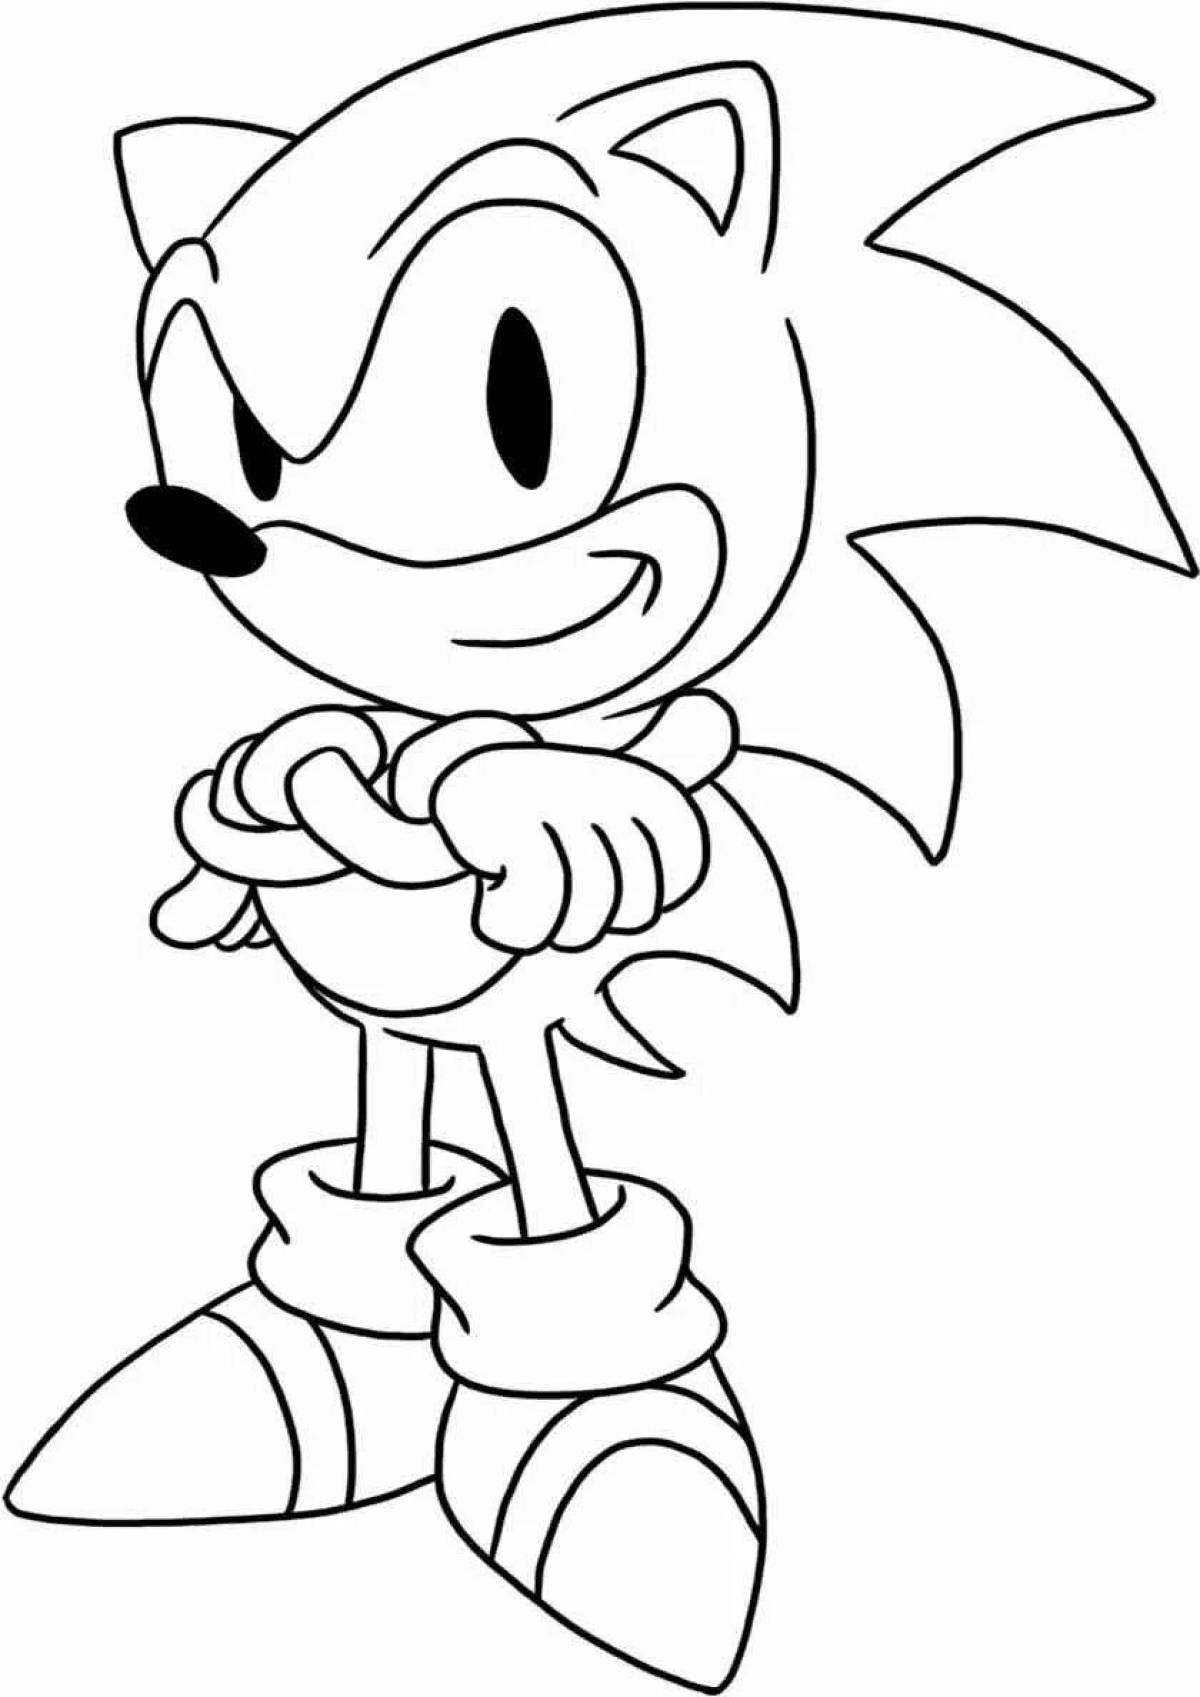 Colorful sonic game coloring book